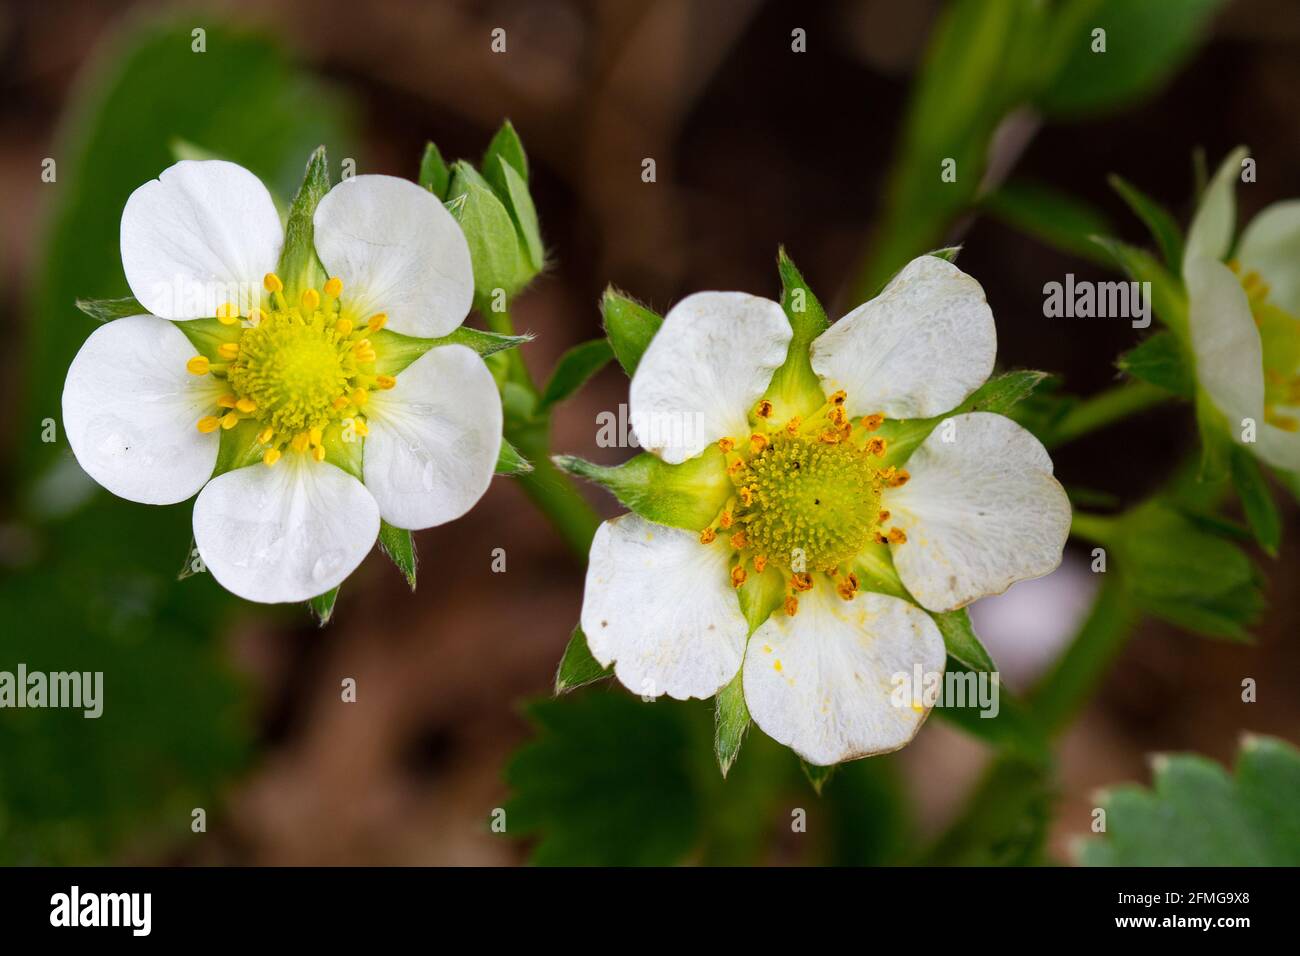 Close-up of two white flowers of a Strawberry Stock Photo